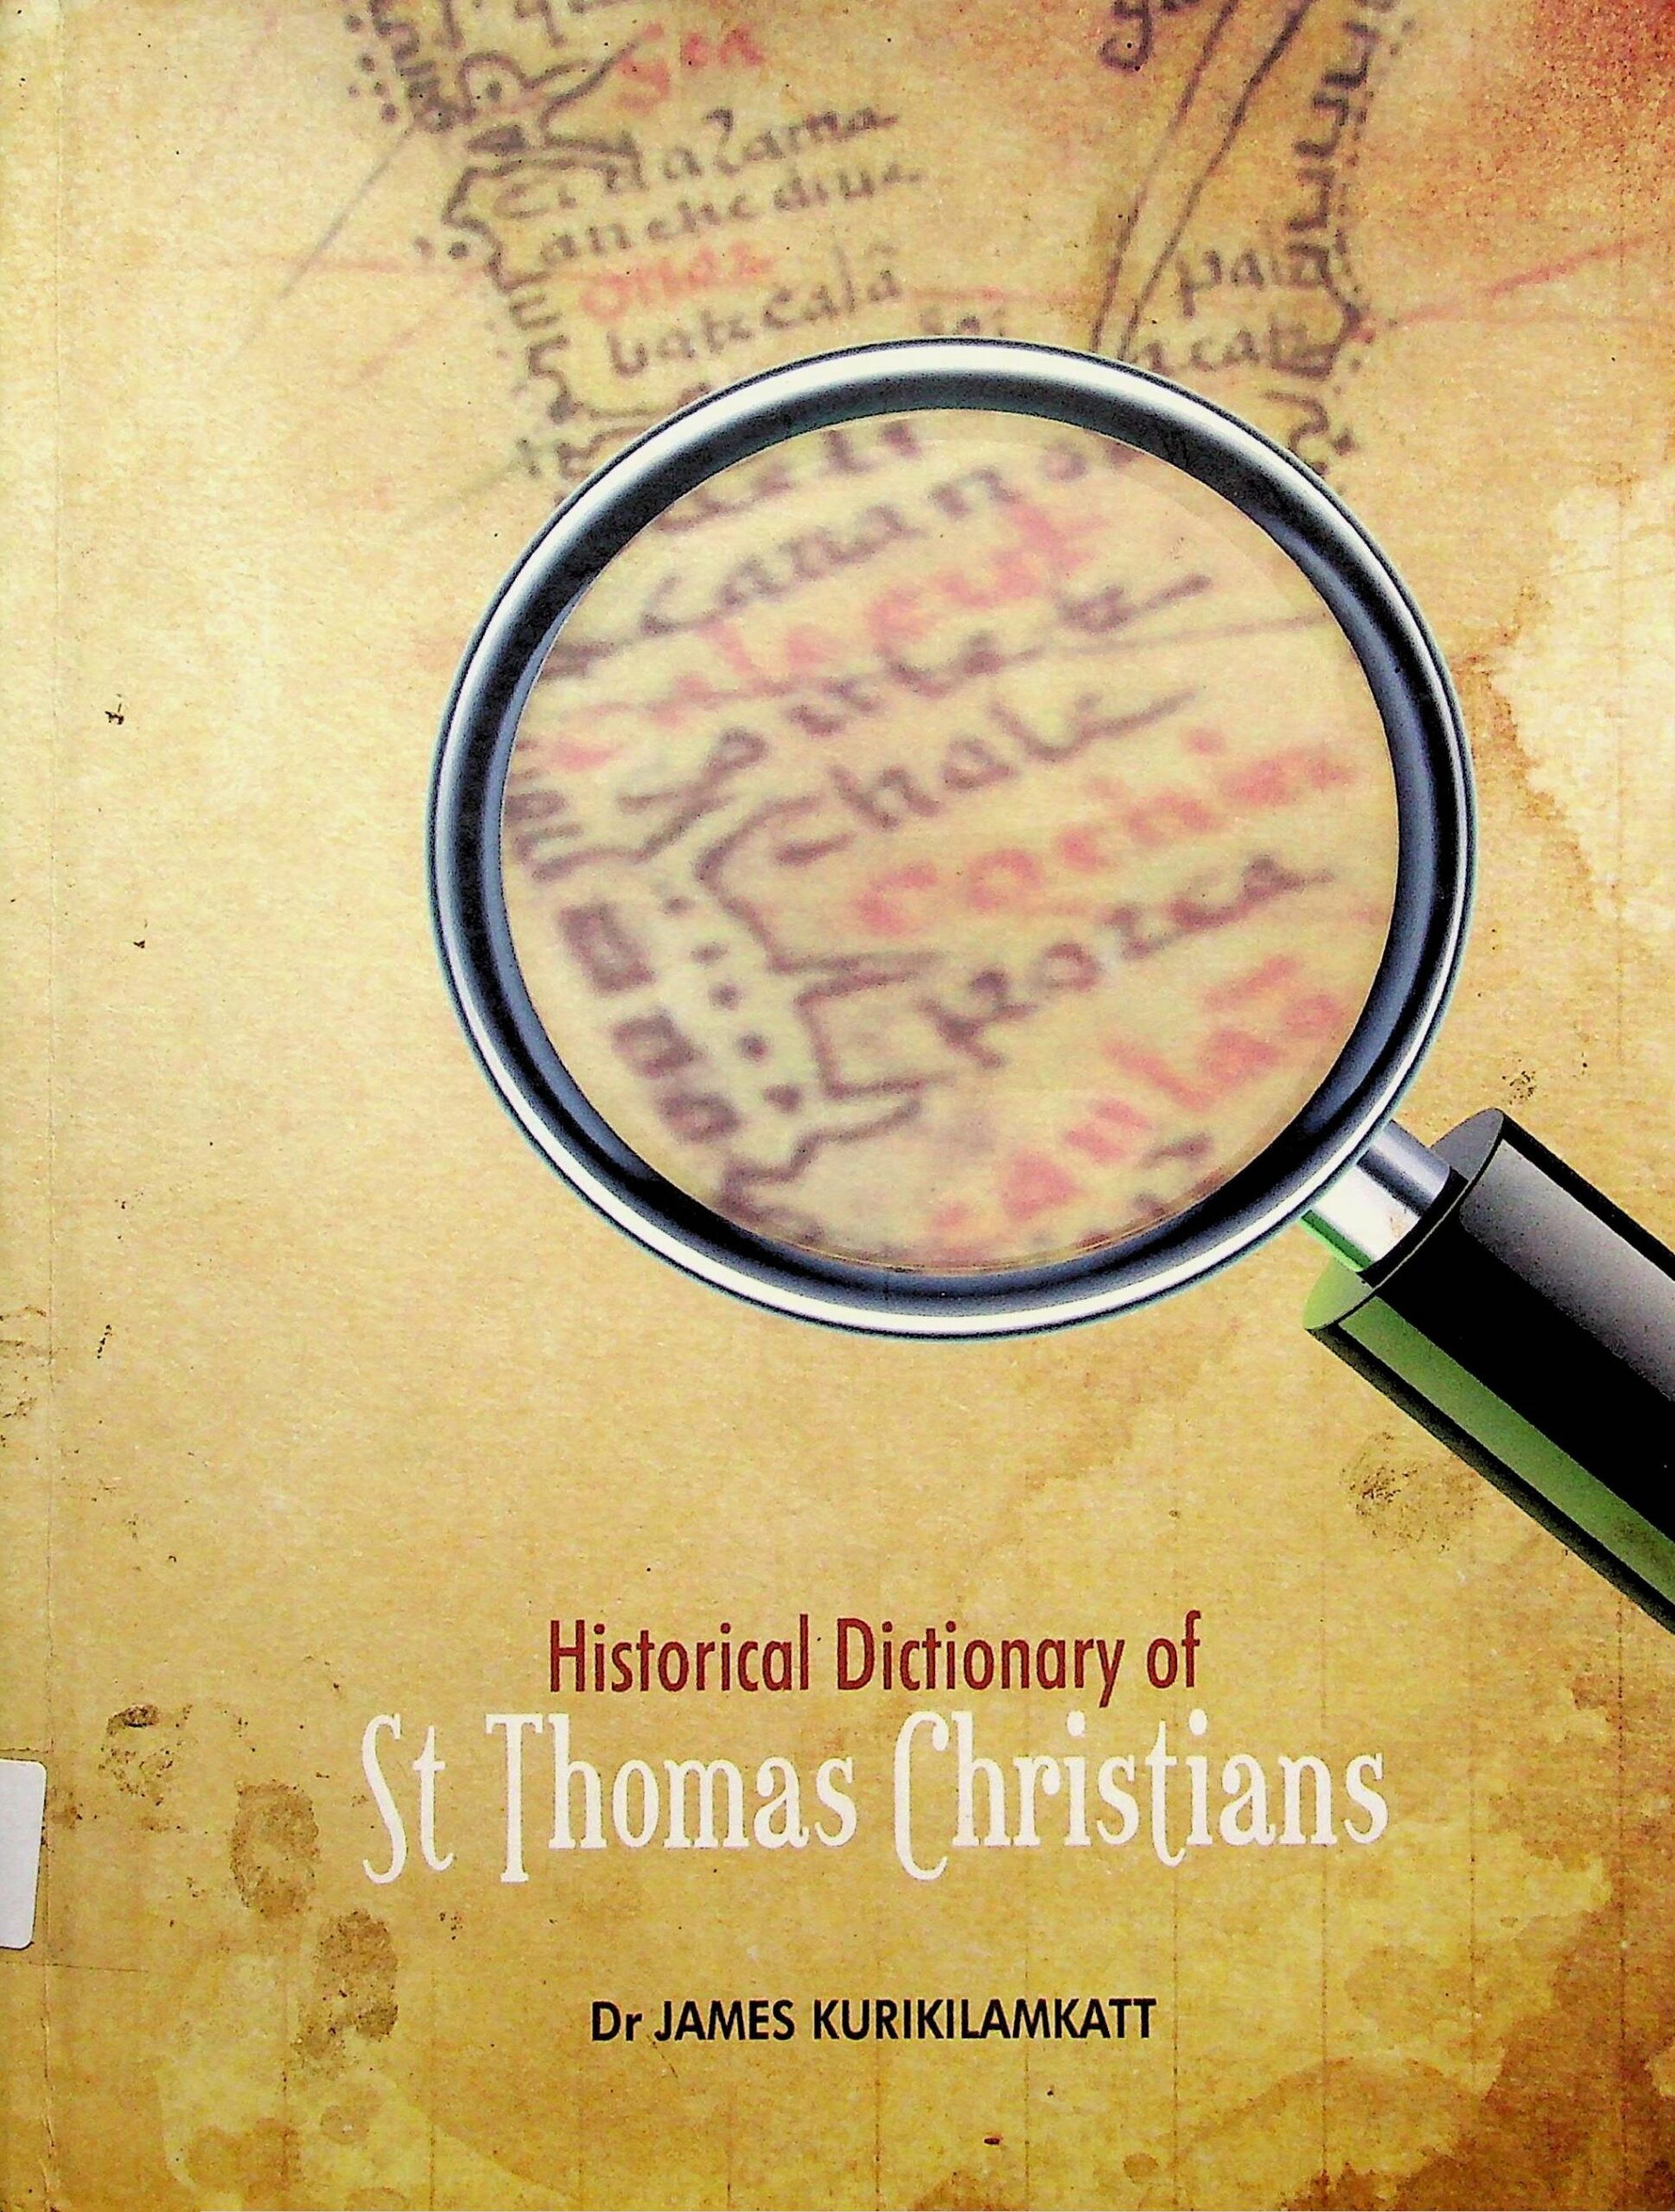 Historical Dictionary of St. Thomas Christians